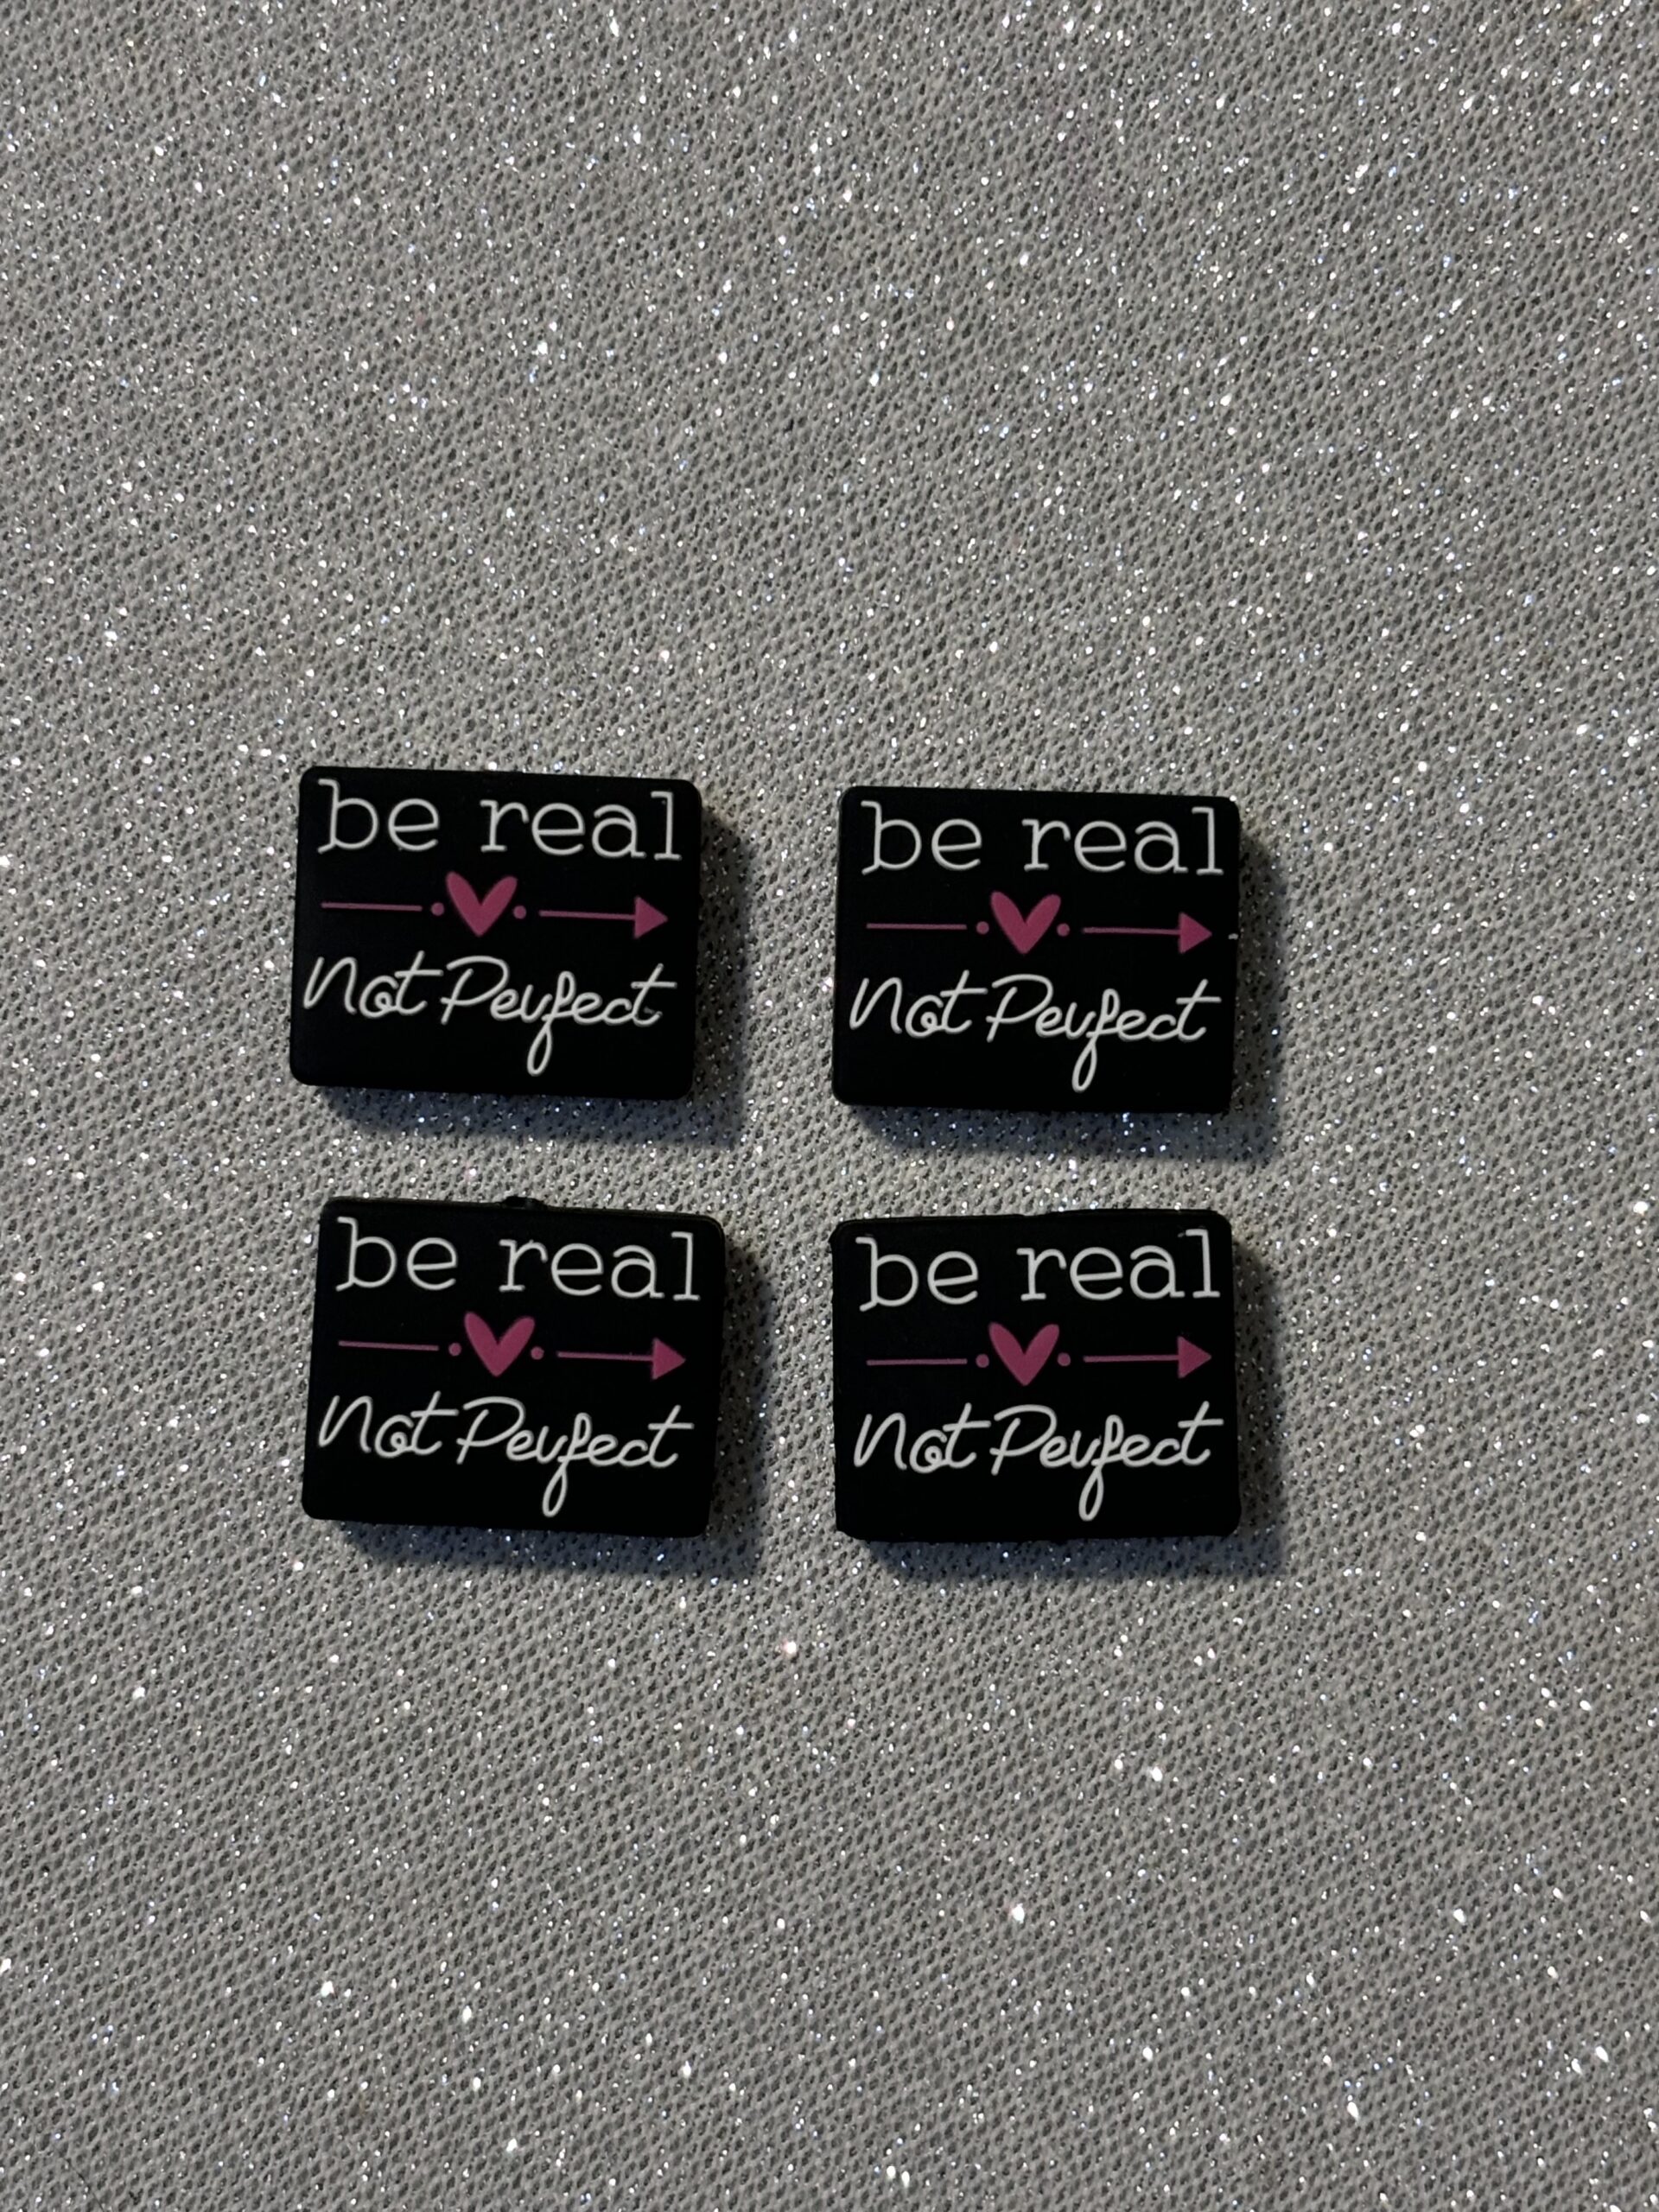 be real not perfect beads